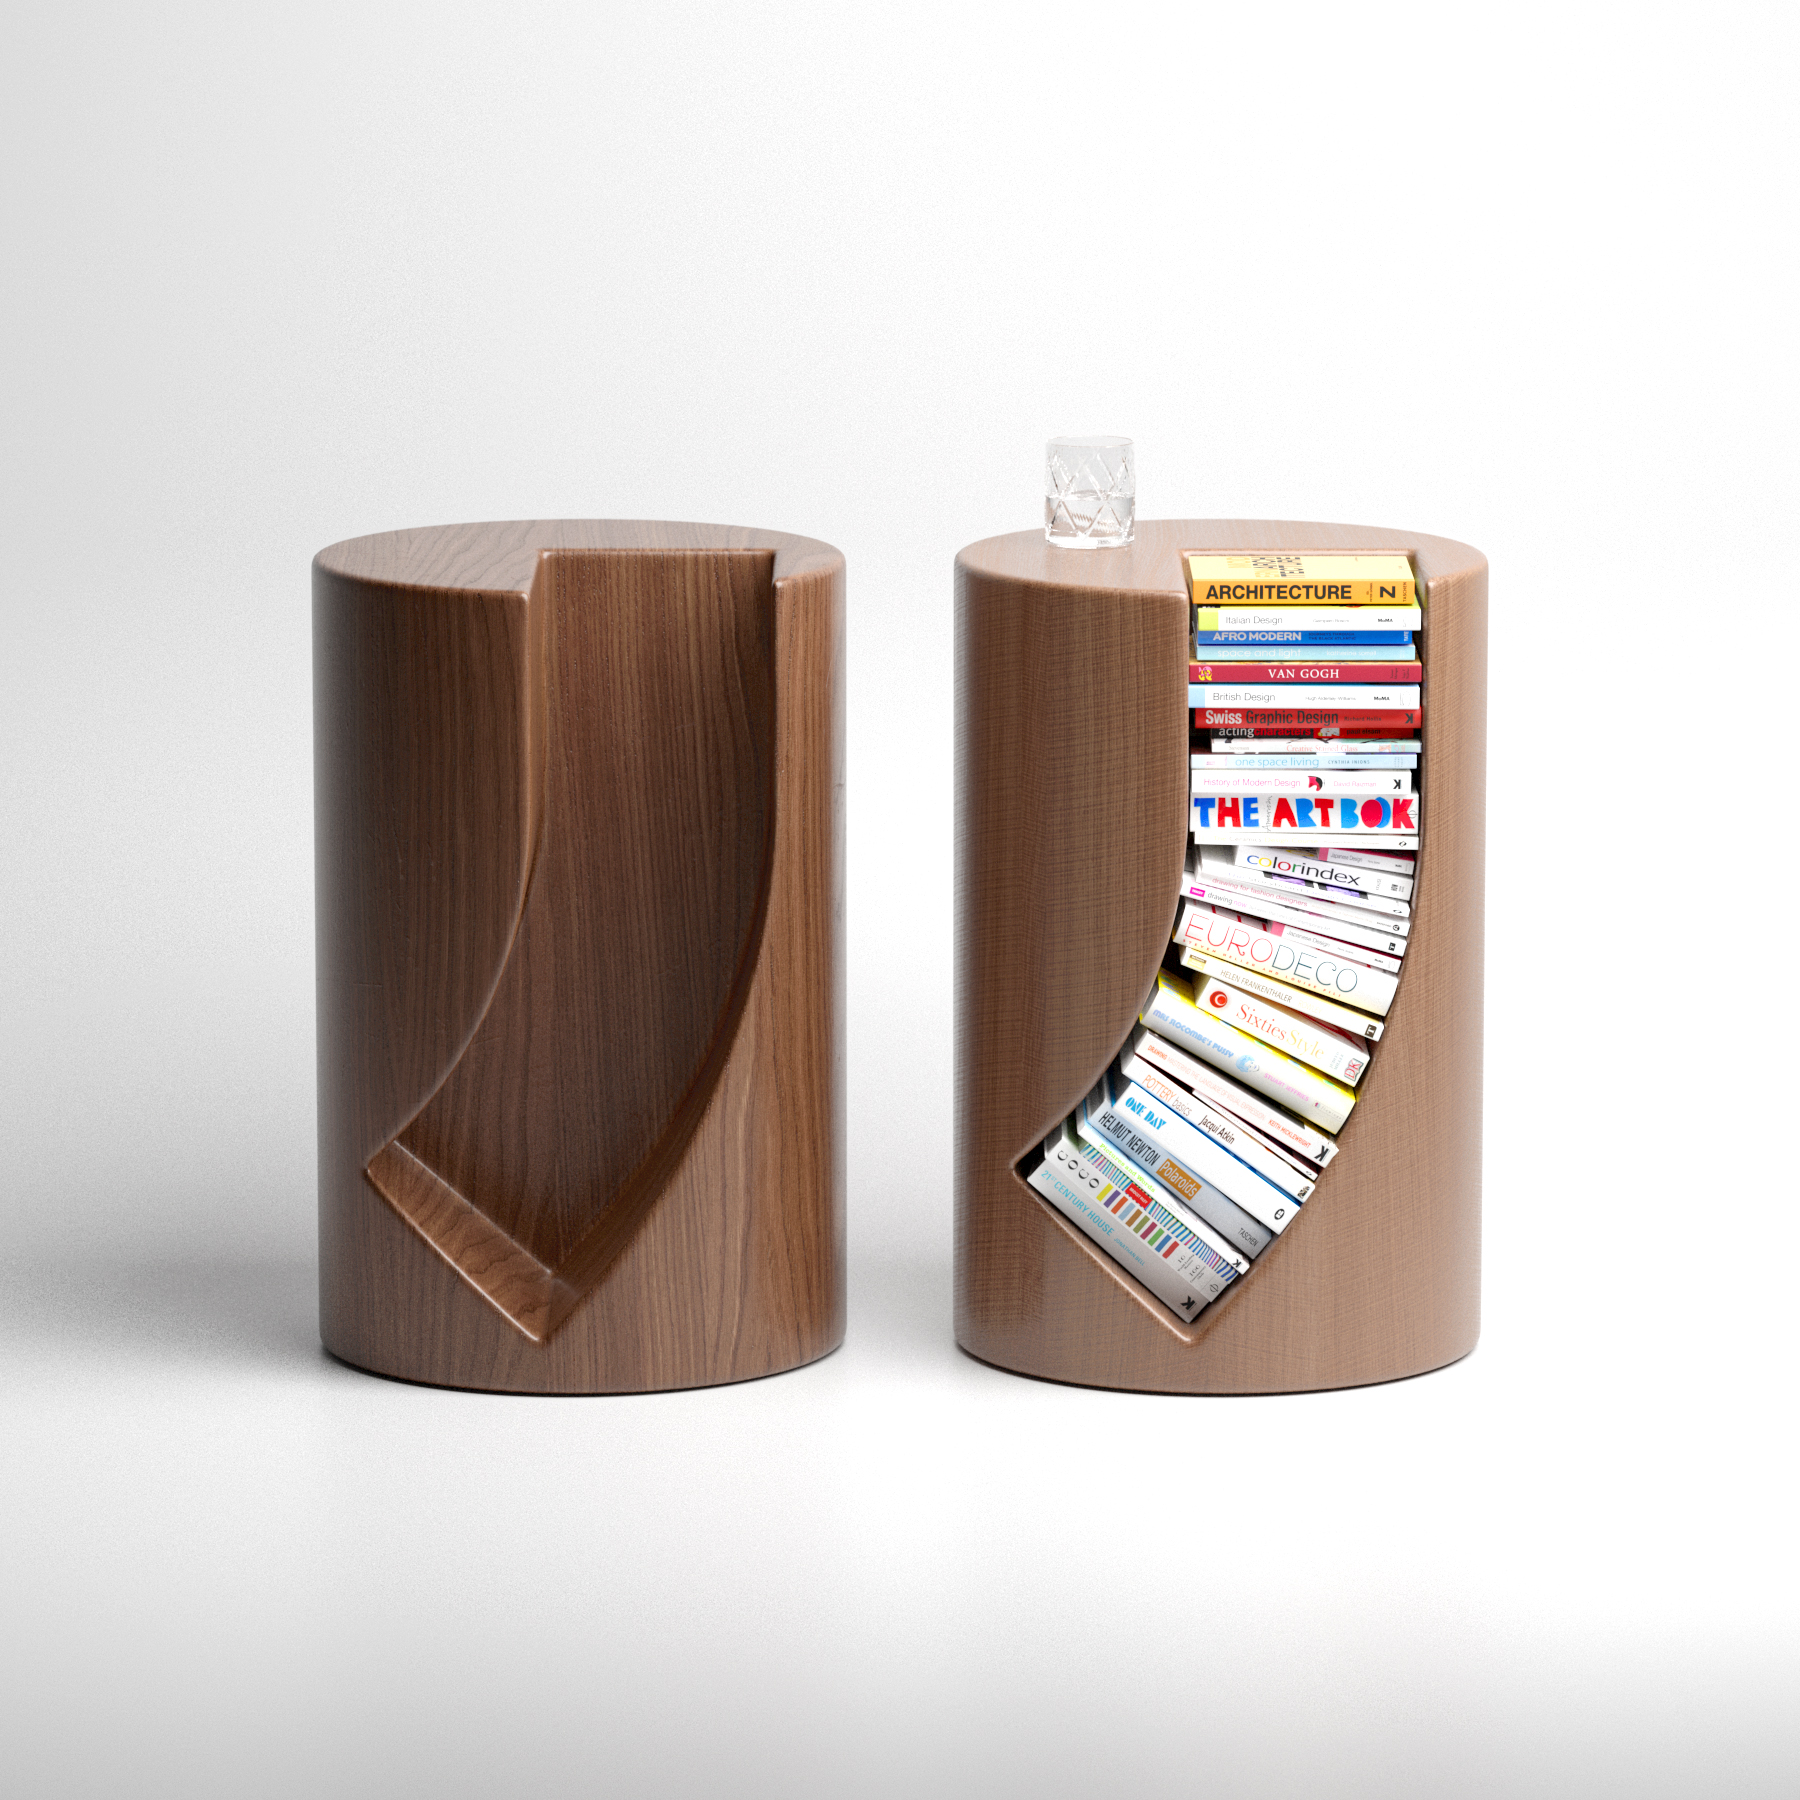 (Bookgroove - A functional Side Table by Deniz Aktay)